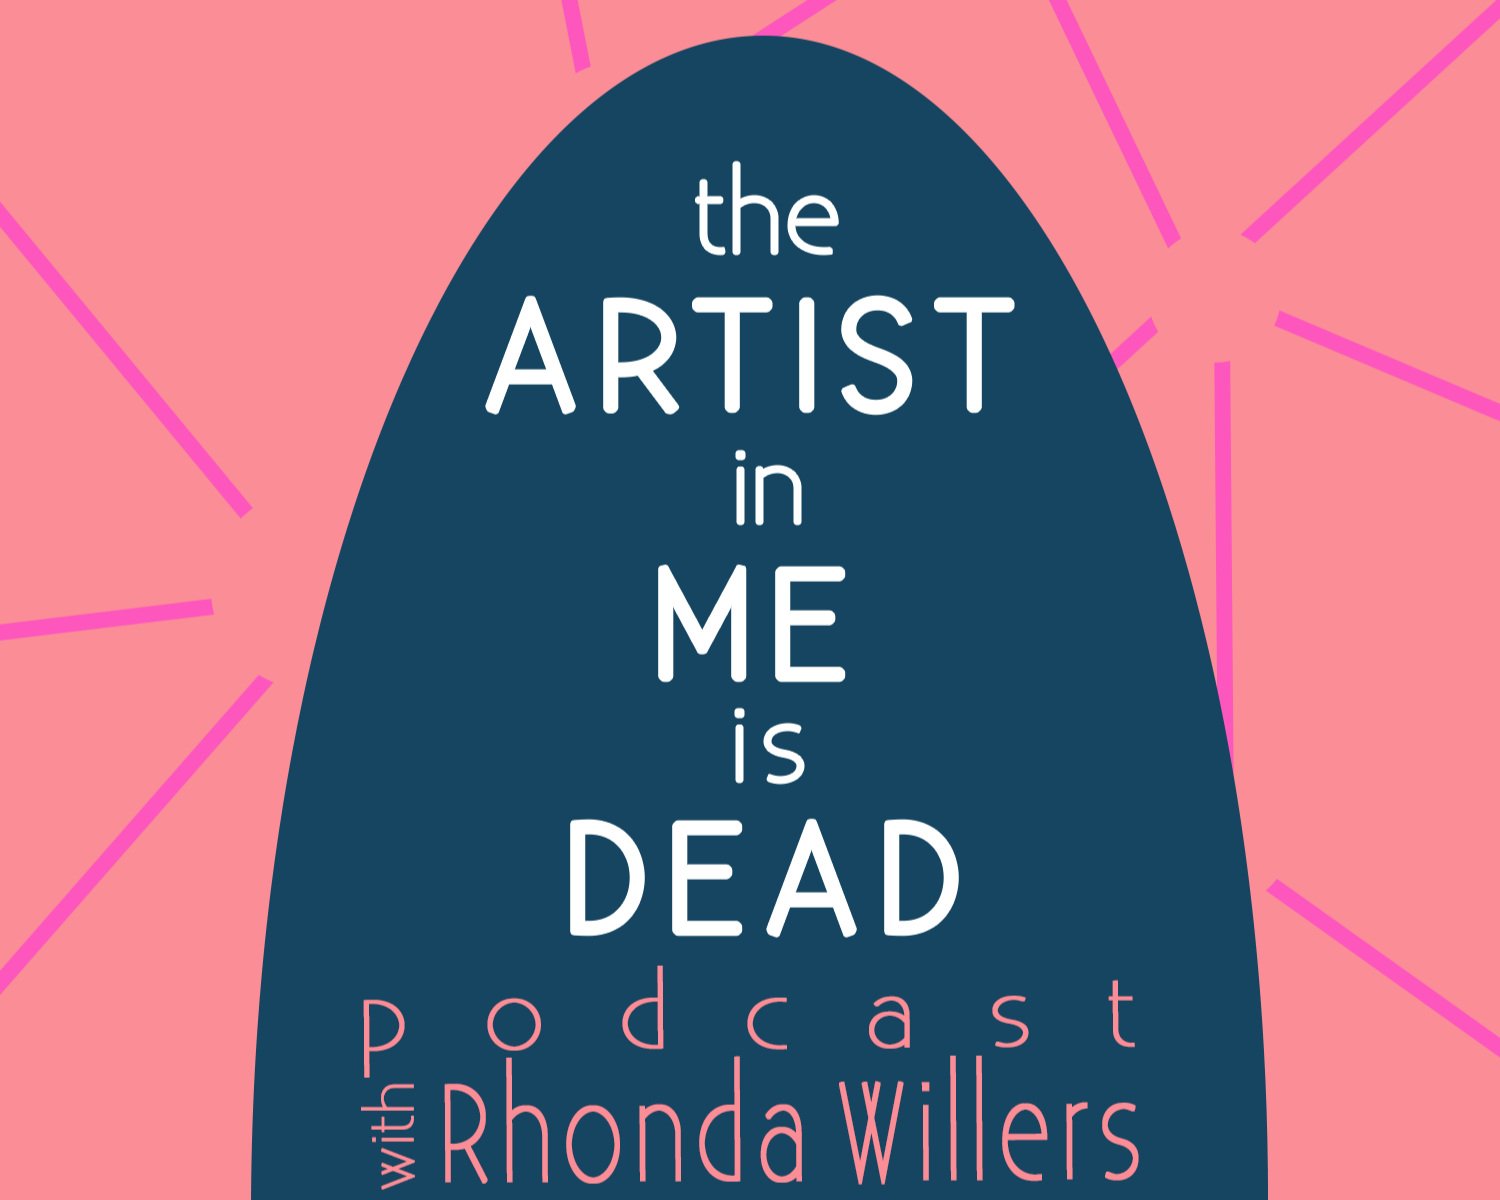 The Artist in Me is Dead Podcast with Rhonda Willers